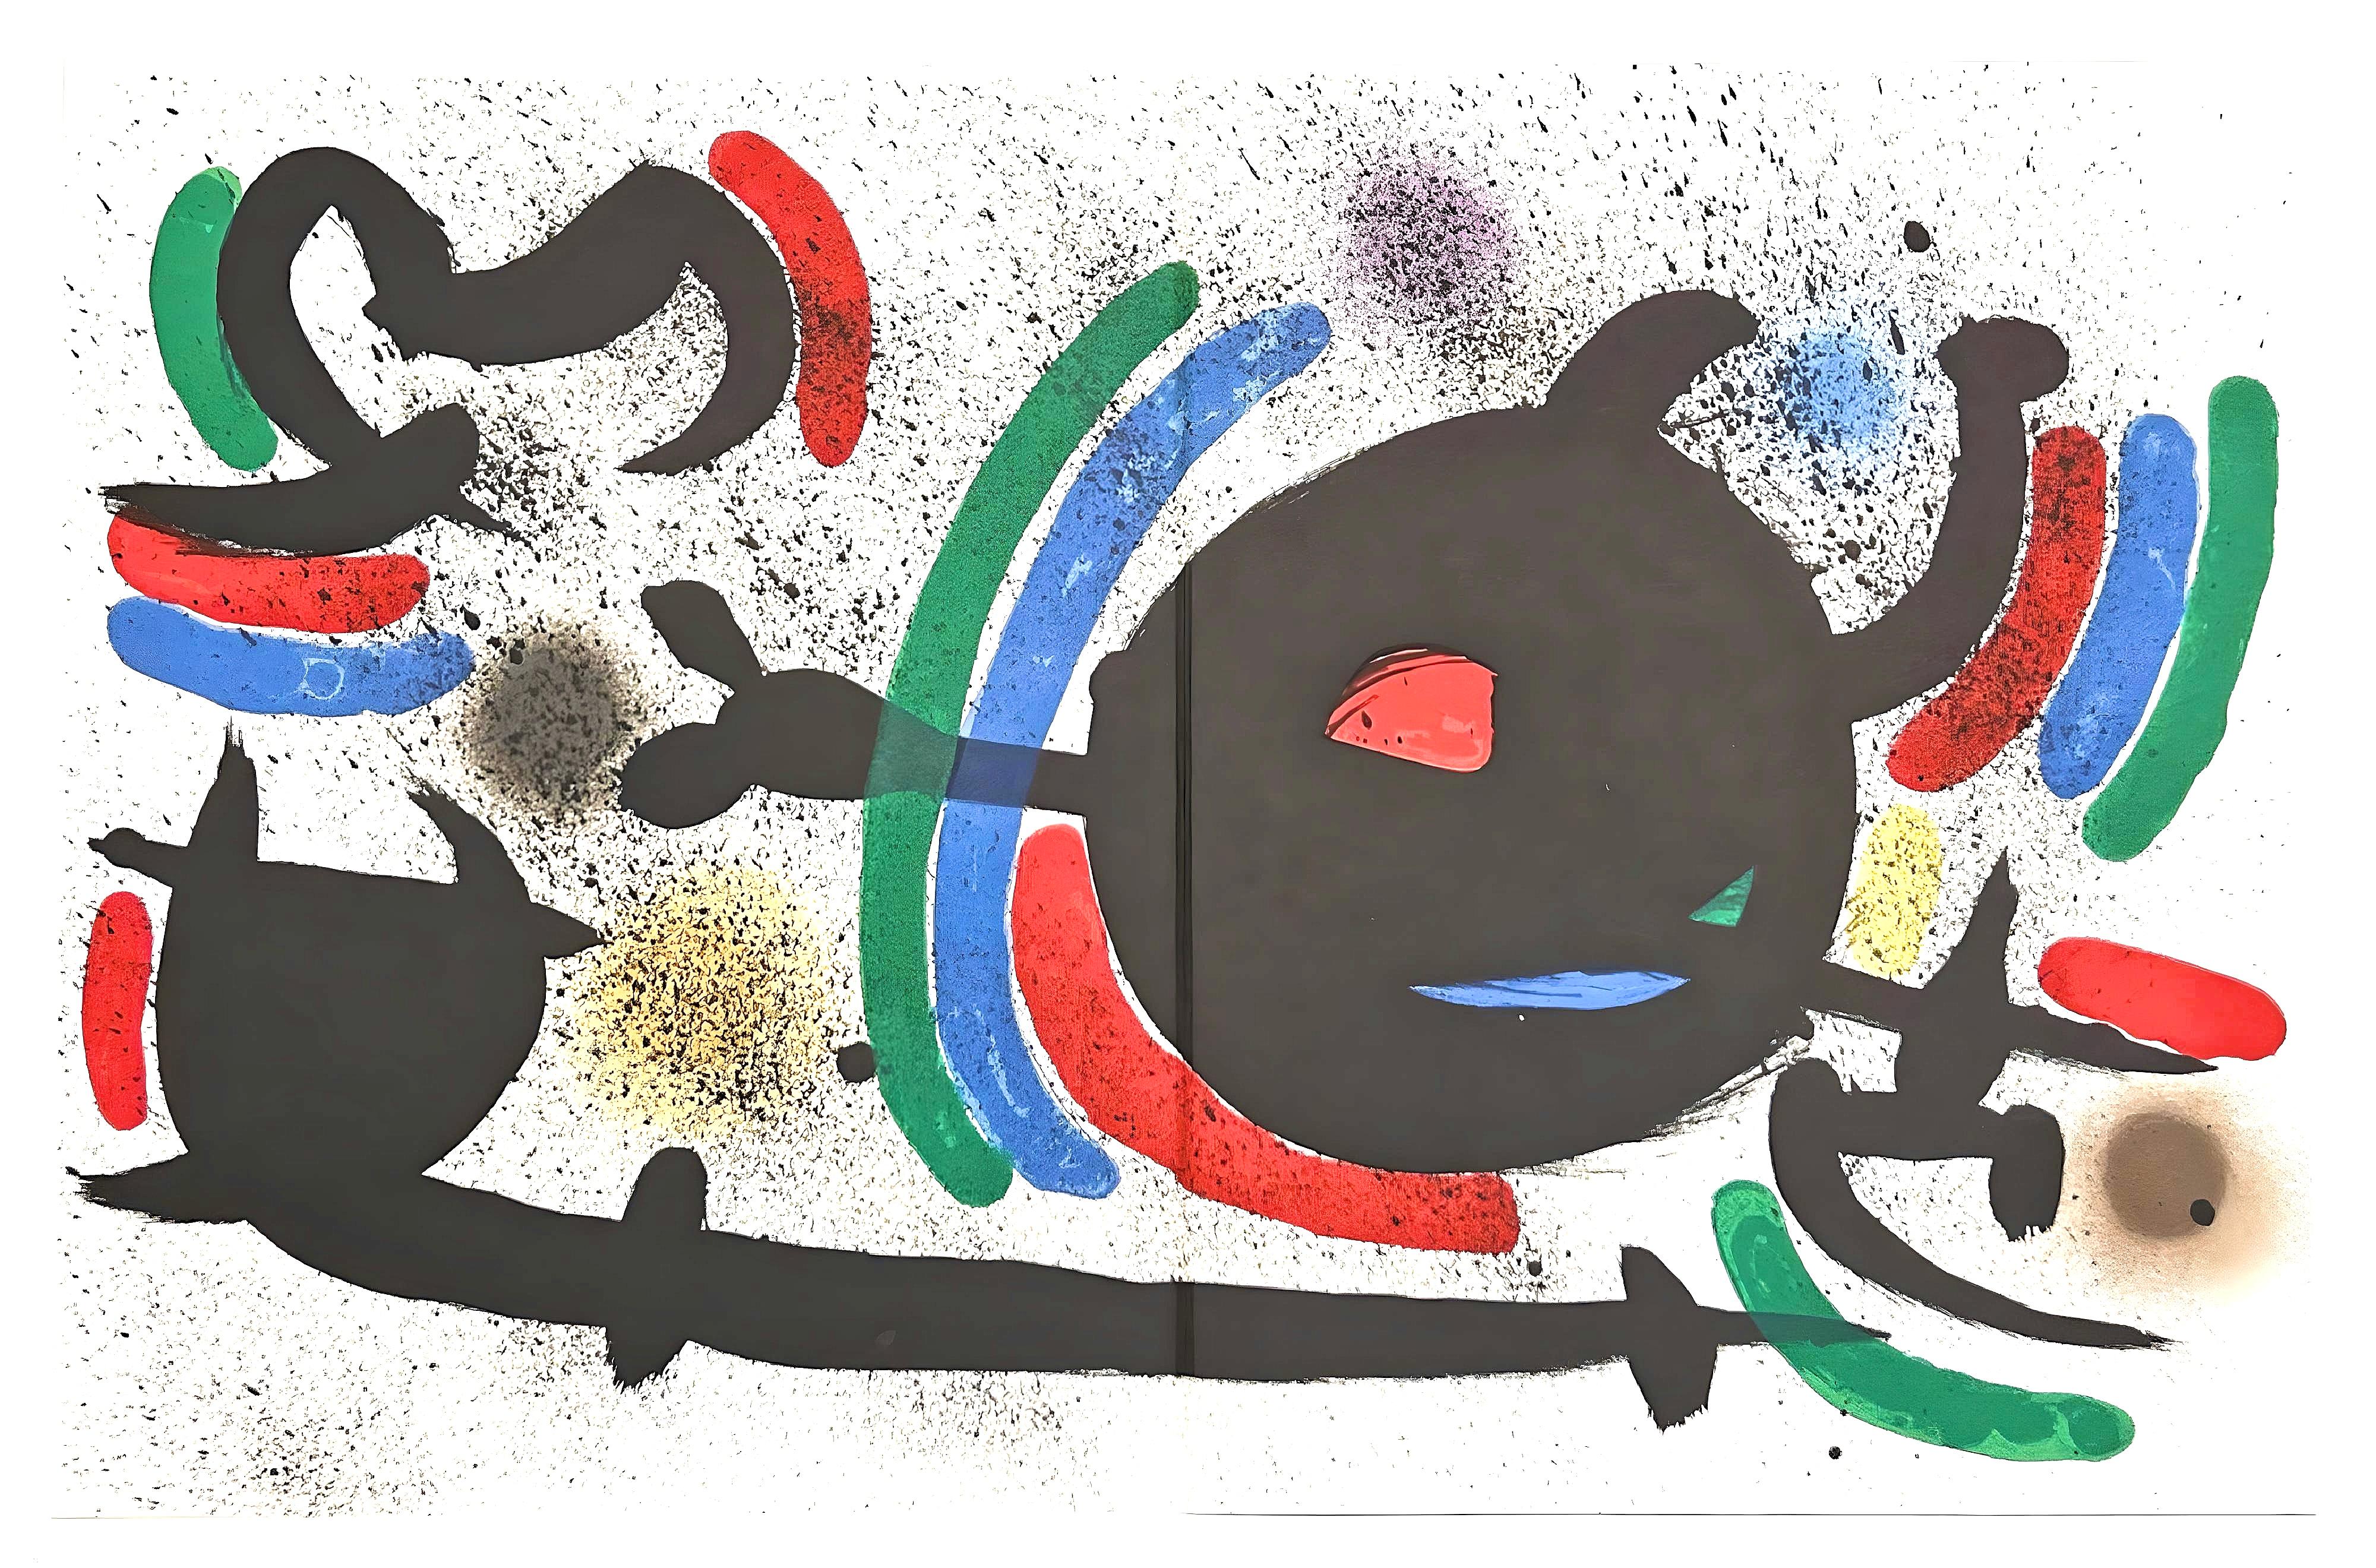 Lithograph on vélin de Rives paper. Inscription: Unsigned and unnumbered, as issued. Good condition, with centerfold, as issued. Notes: From the volume, Joan Miró Litógrafo I. Published by Ediciones Poligrafa, S.A., Barcelona; printed by Mourlot